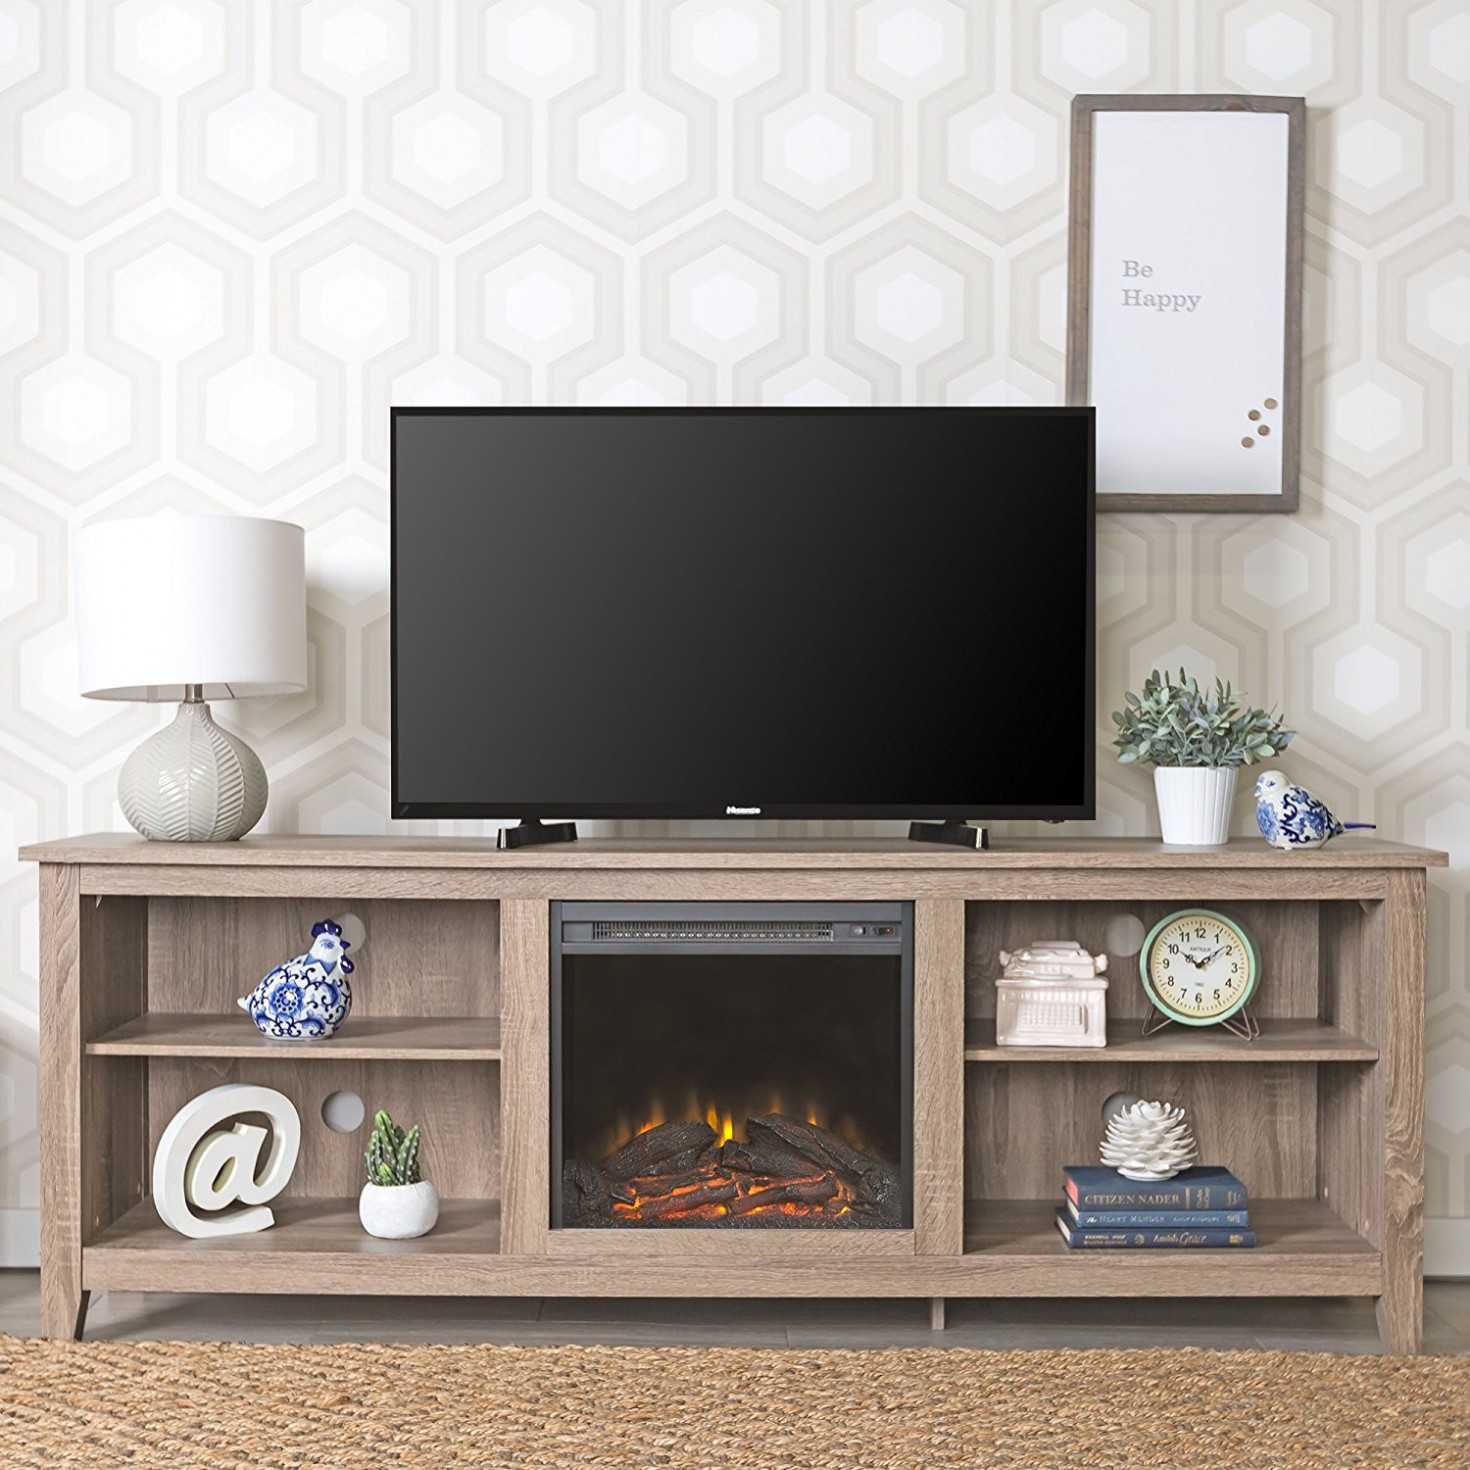 Corner Fireplace Living Room Ideas Best Of Tv Stands Inspirational Led Fireplace Tv Stand